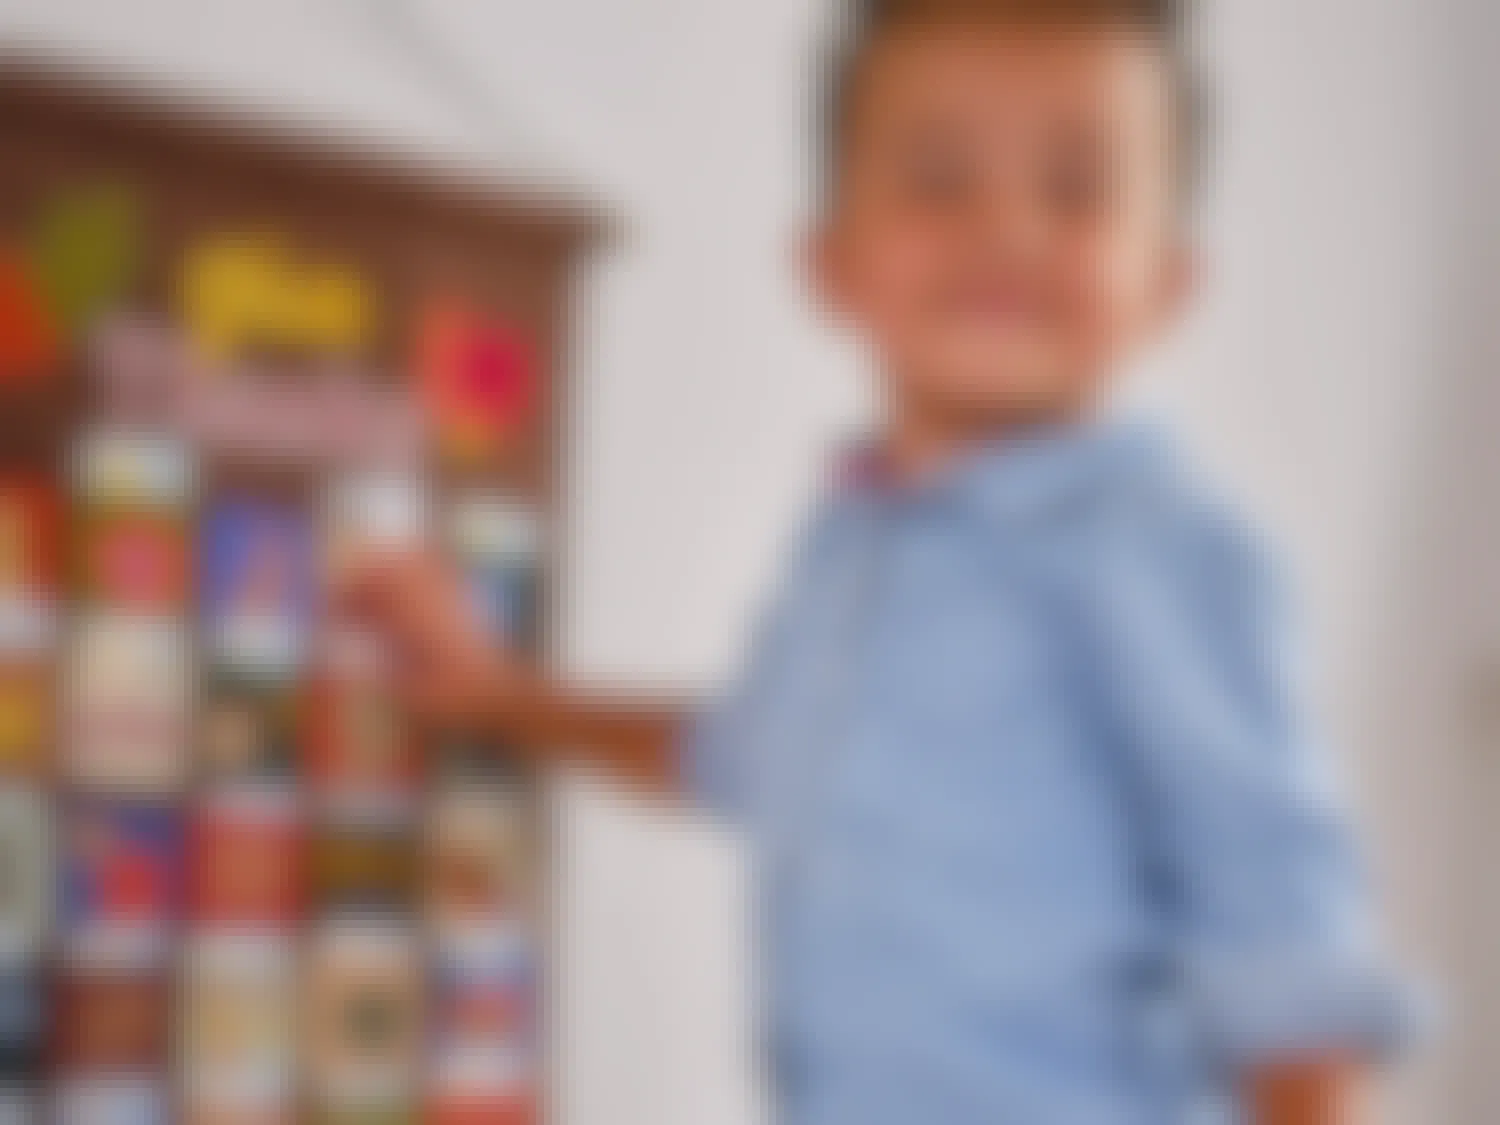 A little boy standing next to a Thanksgiving advent calendar hanging on the wall.